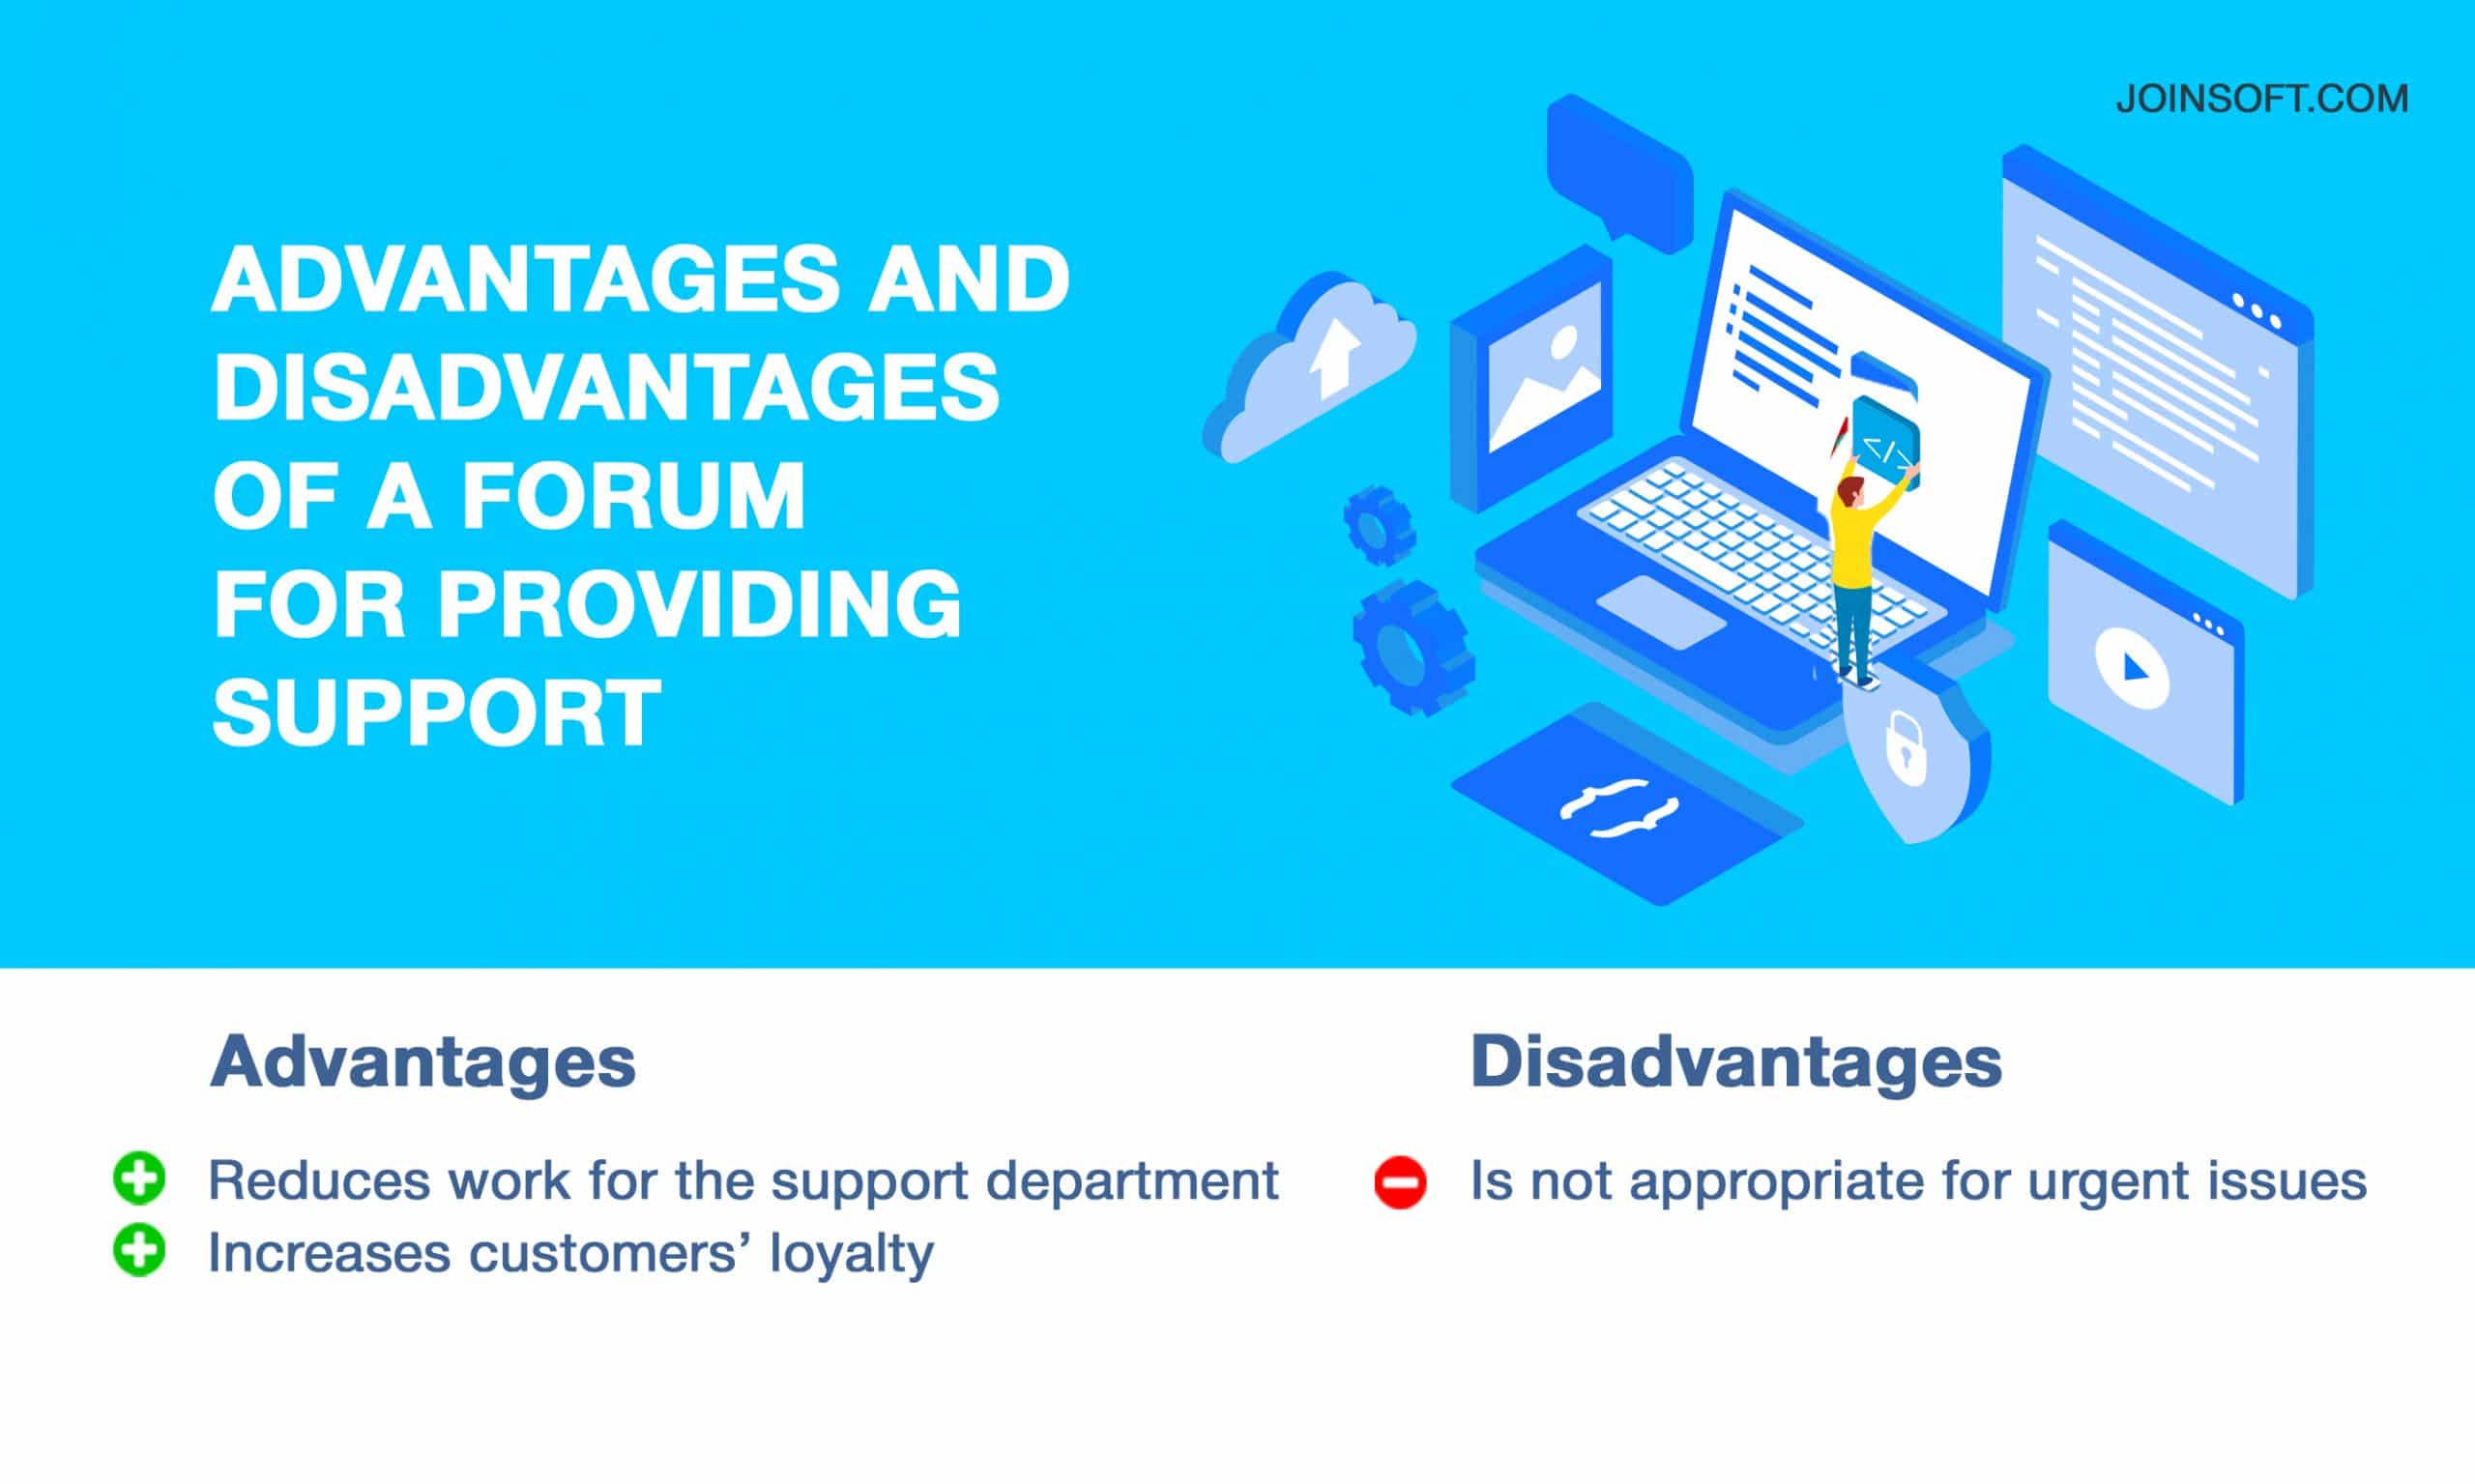 Advantages And Disadvantages of a Forum for Providing Support